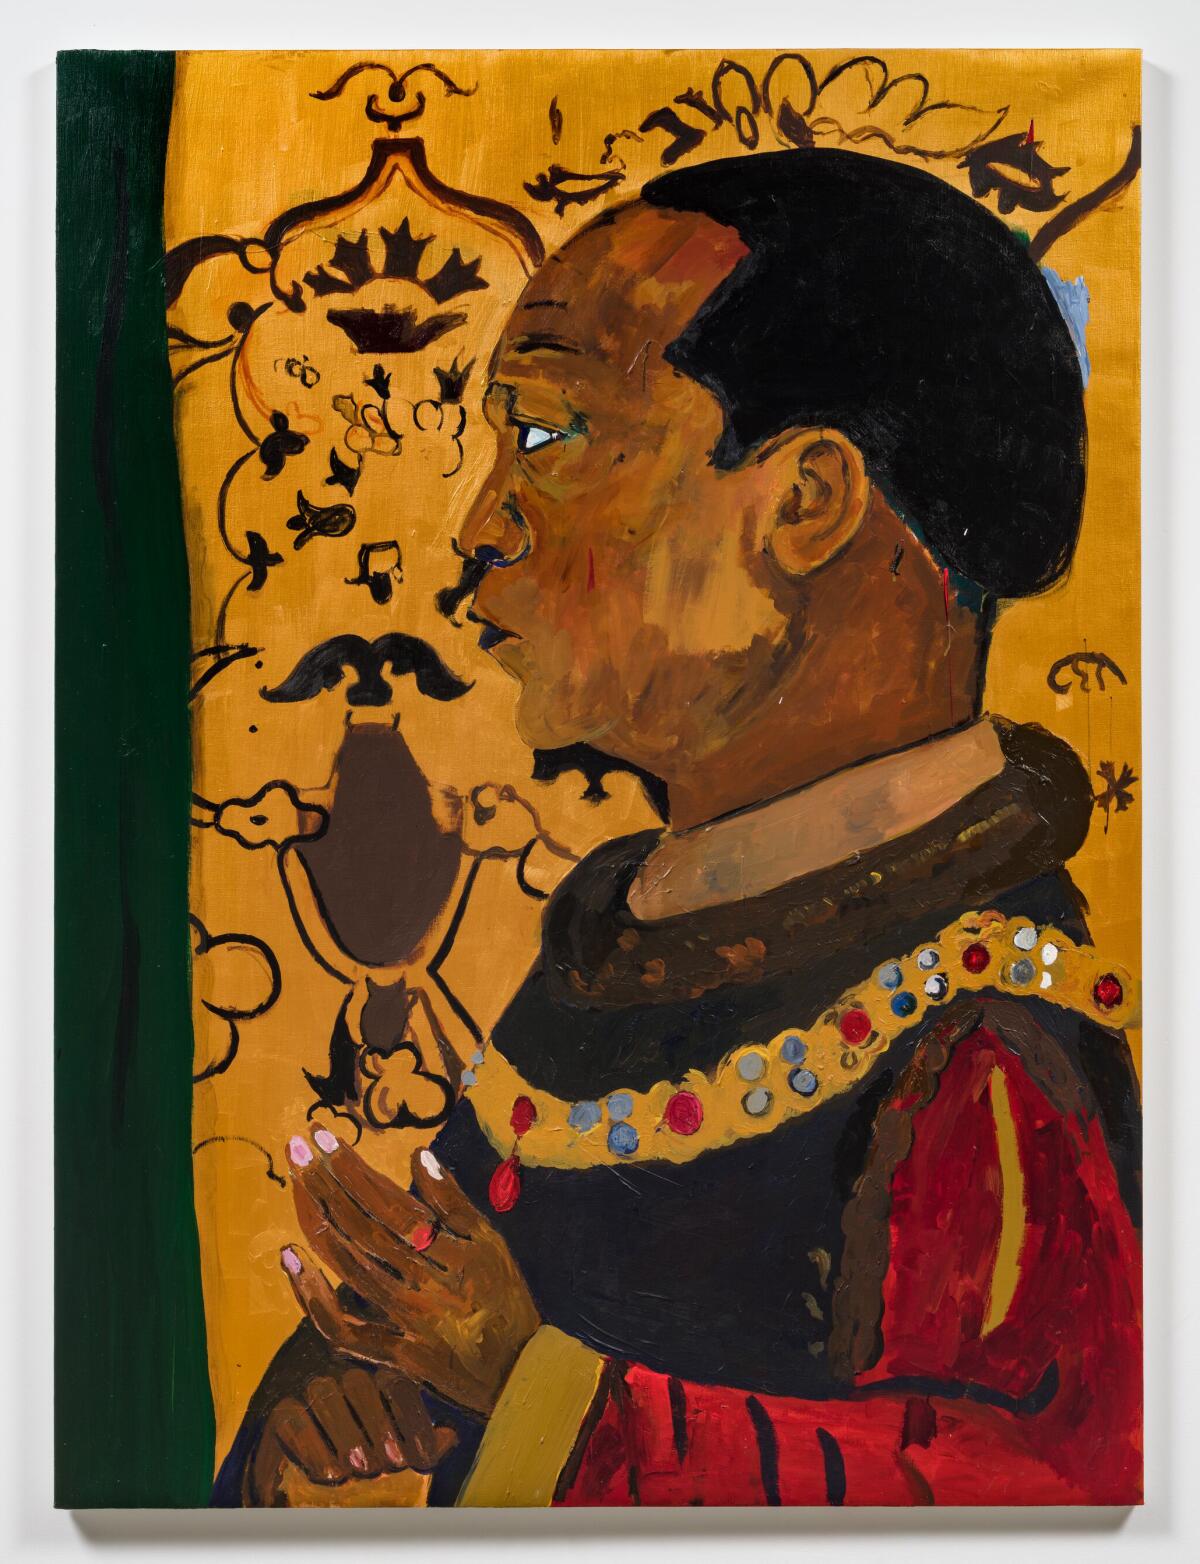 A vertical painting shows a Black man in profile wearing kingly robes against a golden background